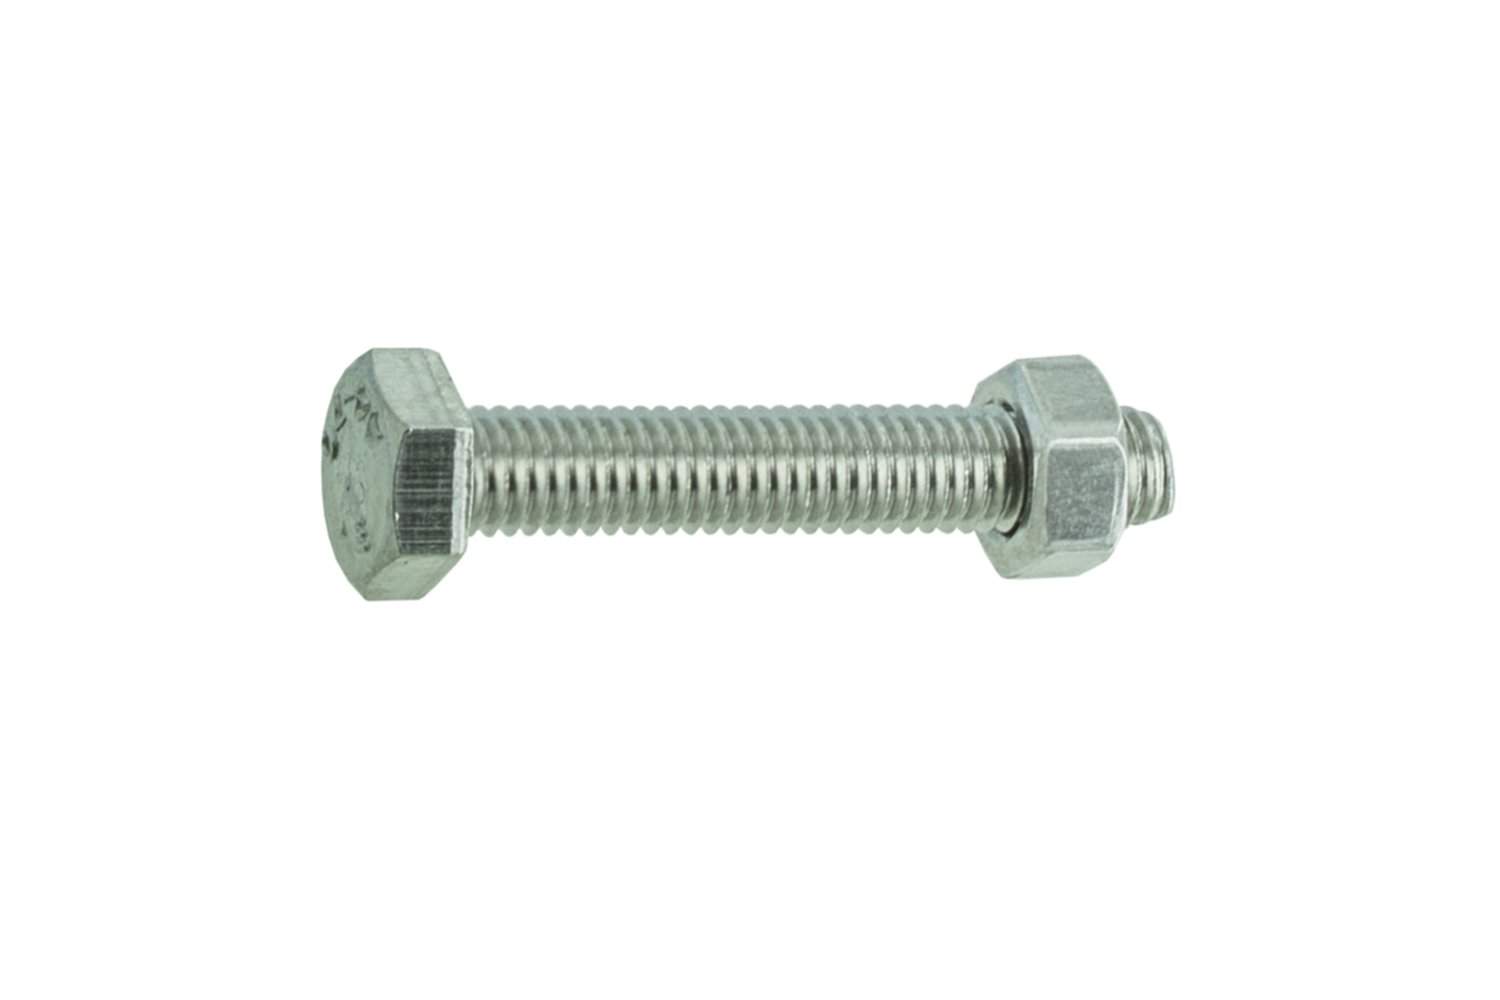 Hex head bolt stainless steel A4 8x40mm, 3 pieces.